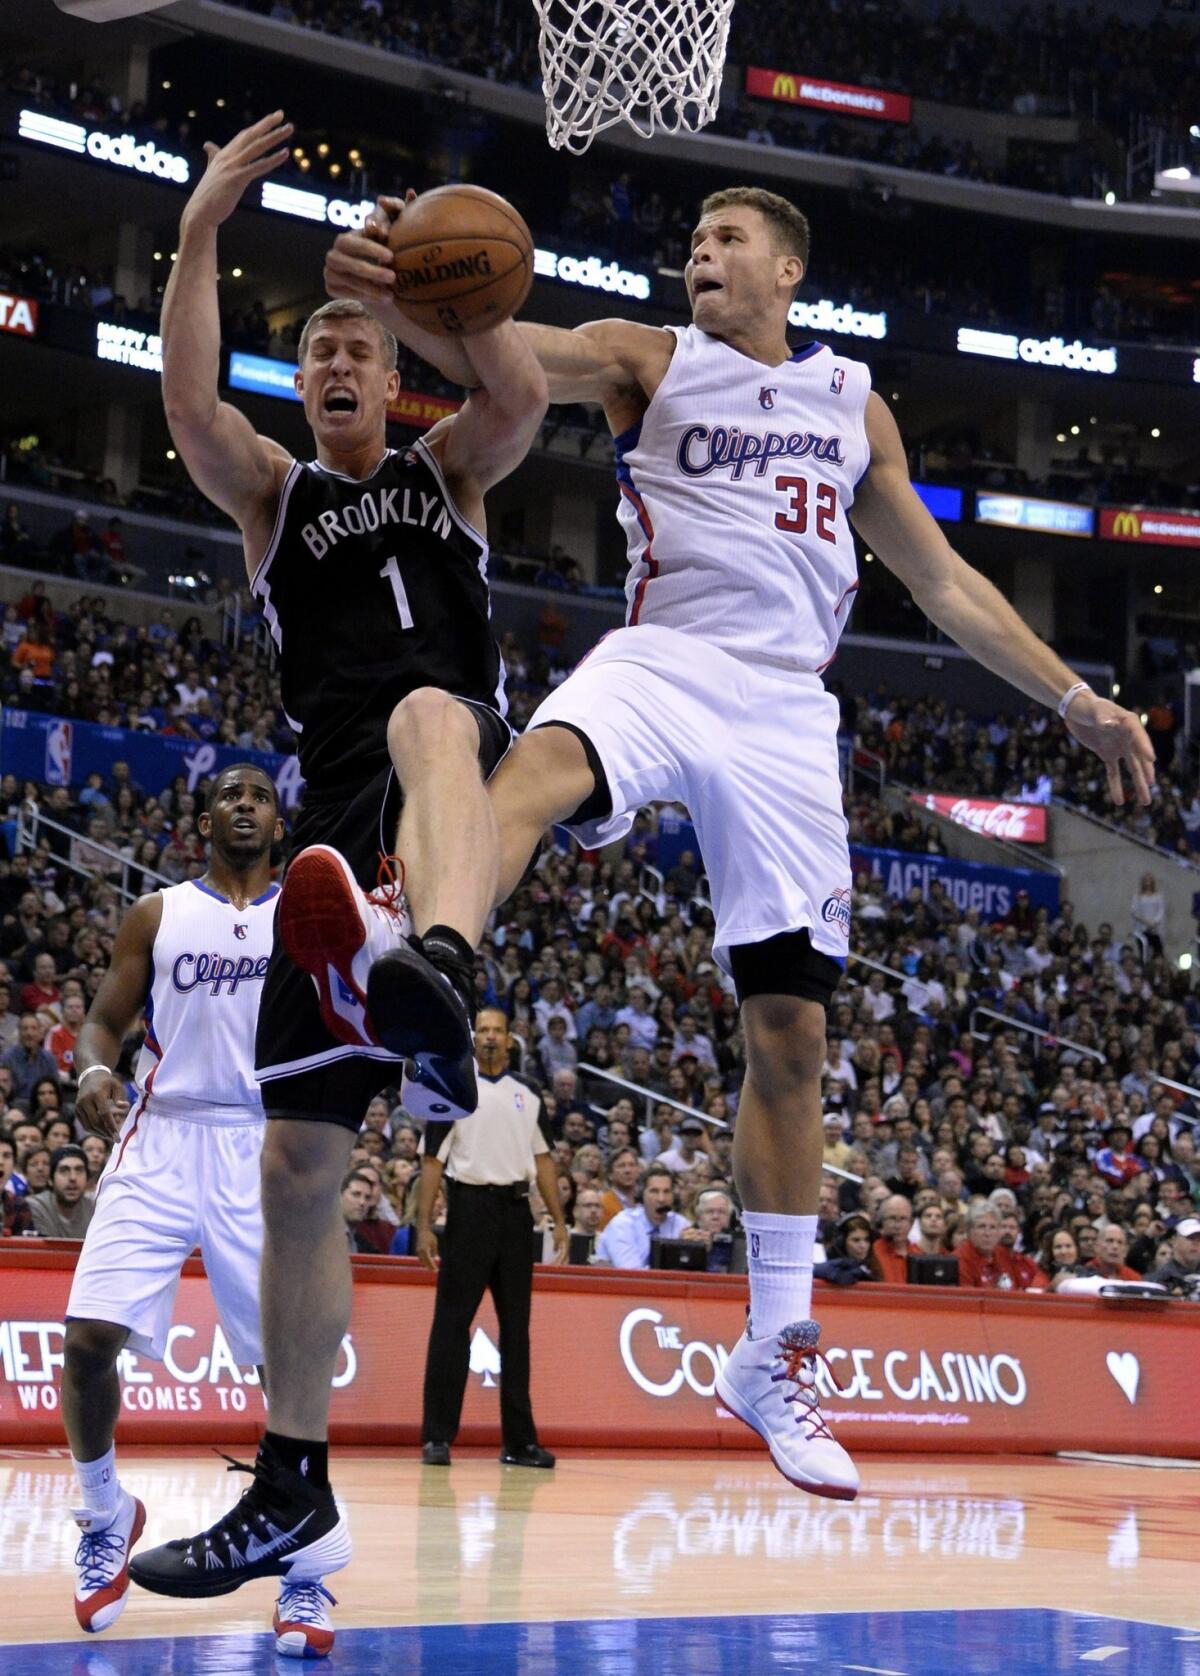 Clippers forward Blake Griffin, right, battles Brooklyn Nets forward Mason Plumlee for the ball during the Clippers' 110-103 win Saturday night at Staples Center.